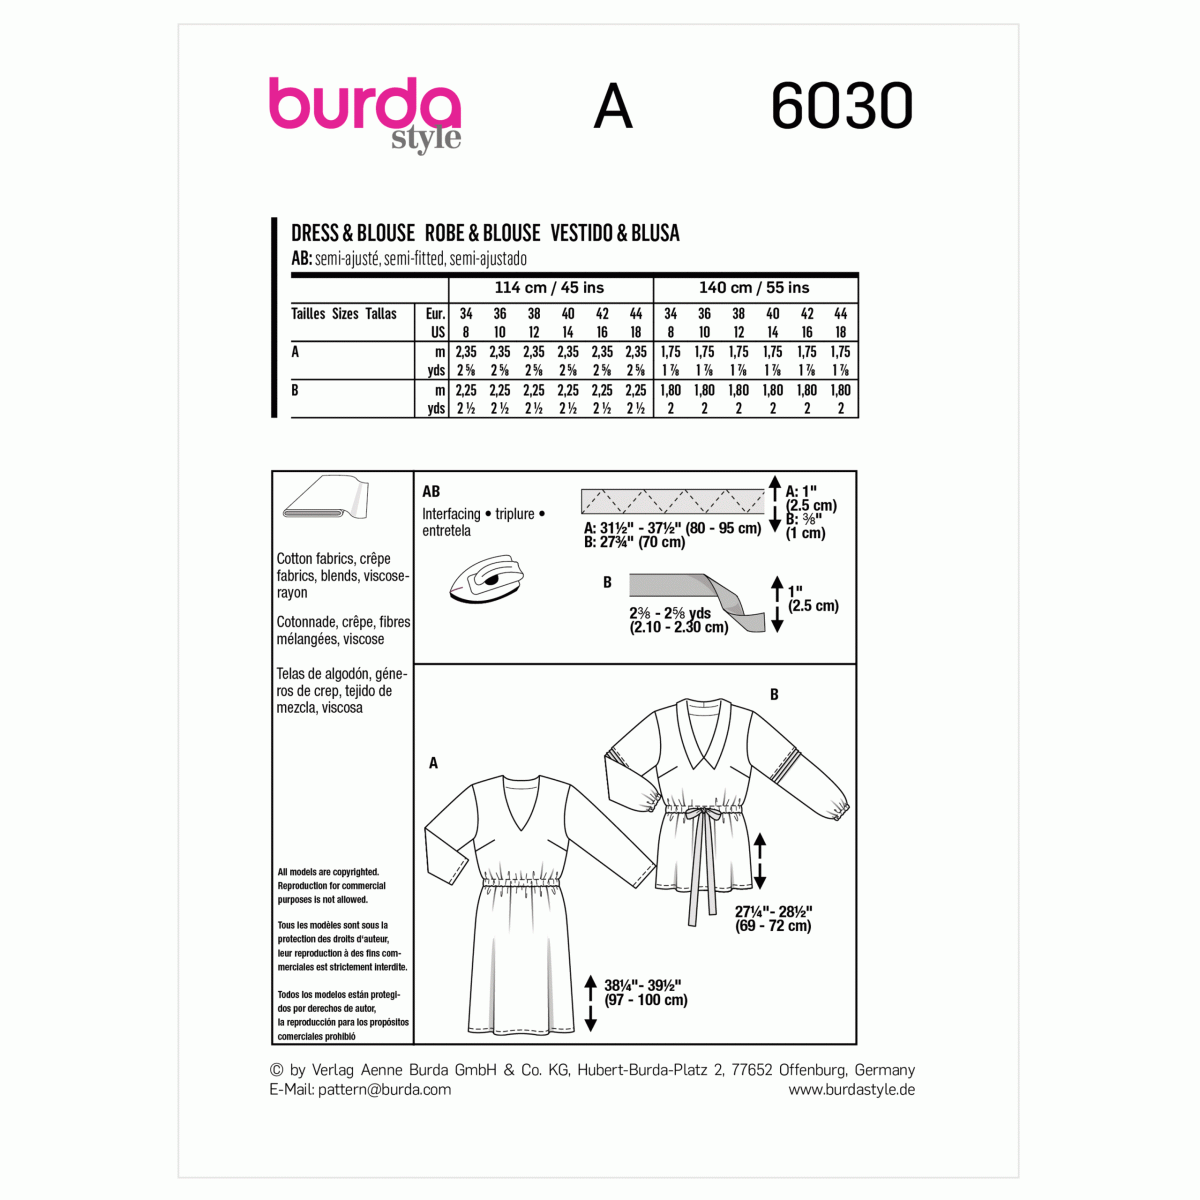 Burda Style Pattern 6030 Misses' Dress and Blouse